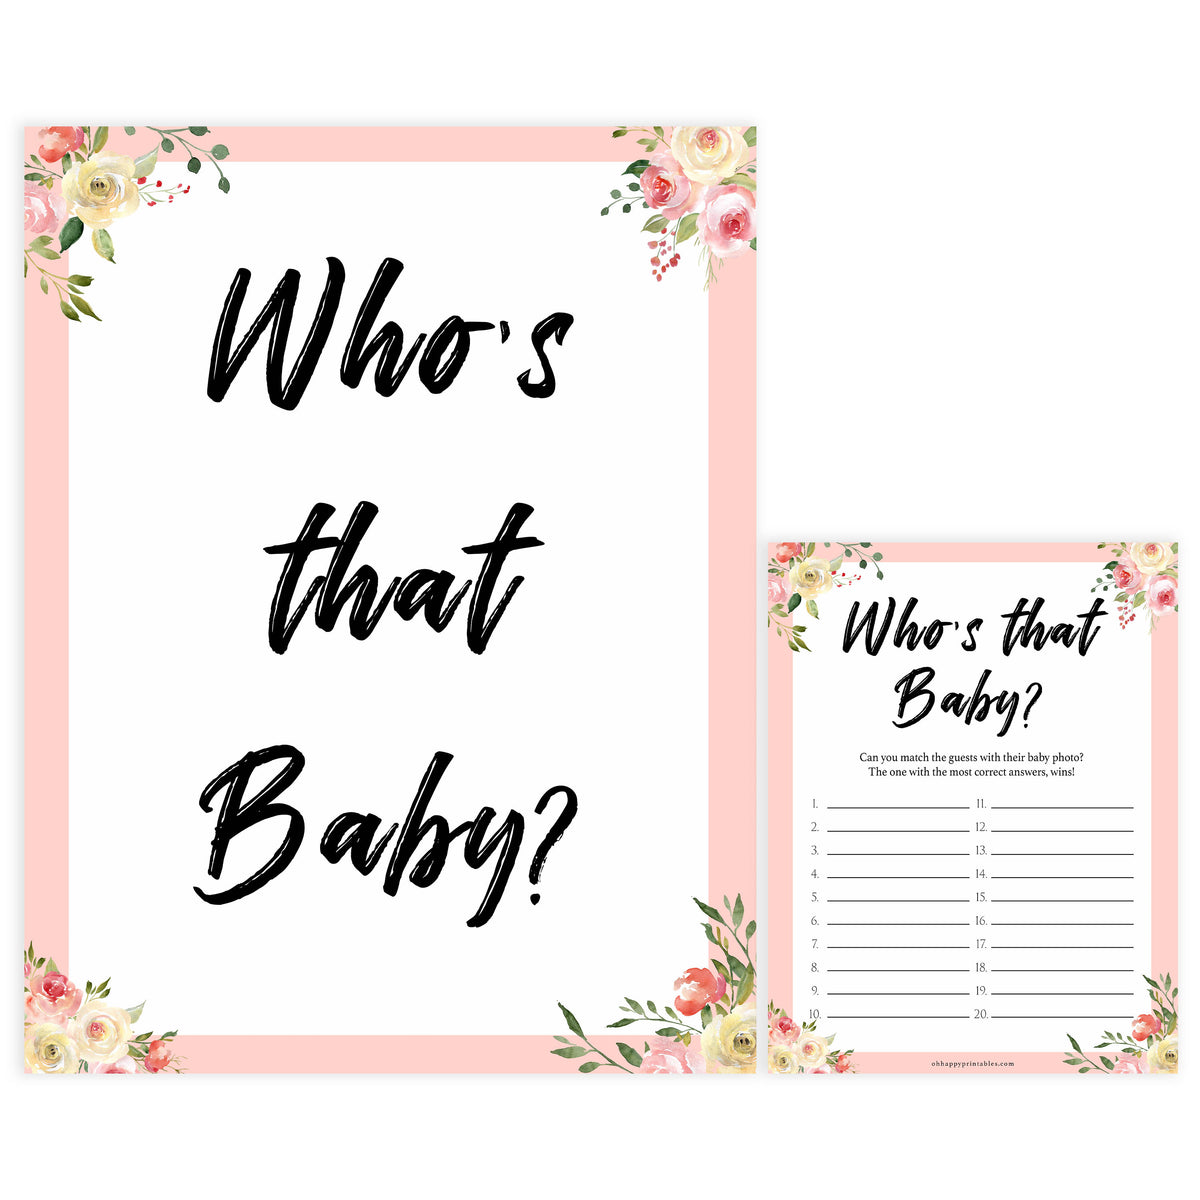 whos that baby game, guess the baby picture game, Printable baby shower games, floral fun baby games, baby shower games, fun baby shower ideas, top baby shower ideas, floral baby shower, blue baby shower ideas